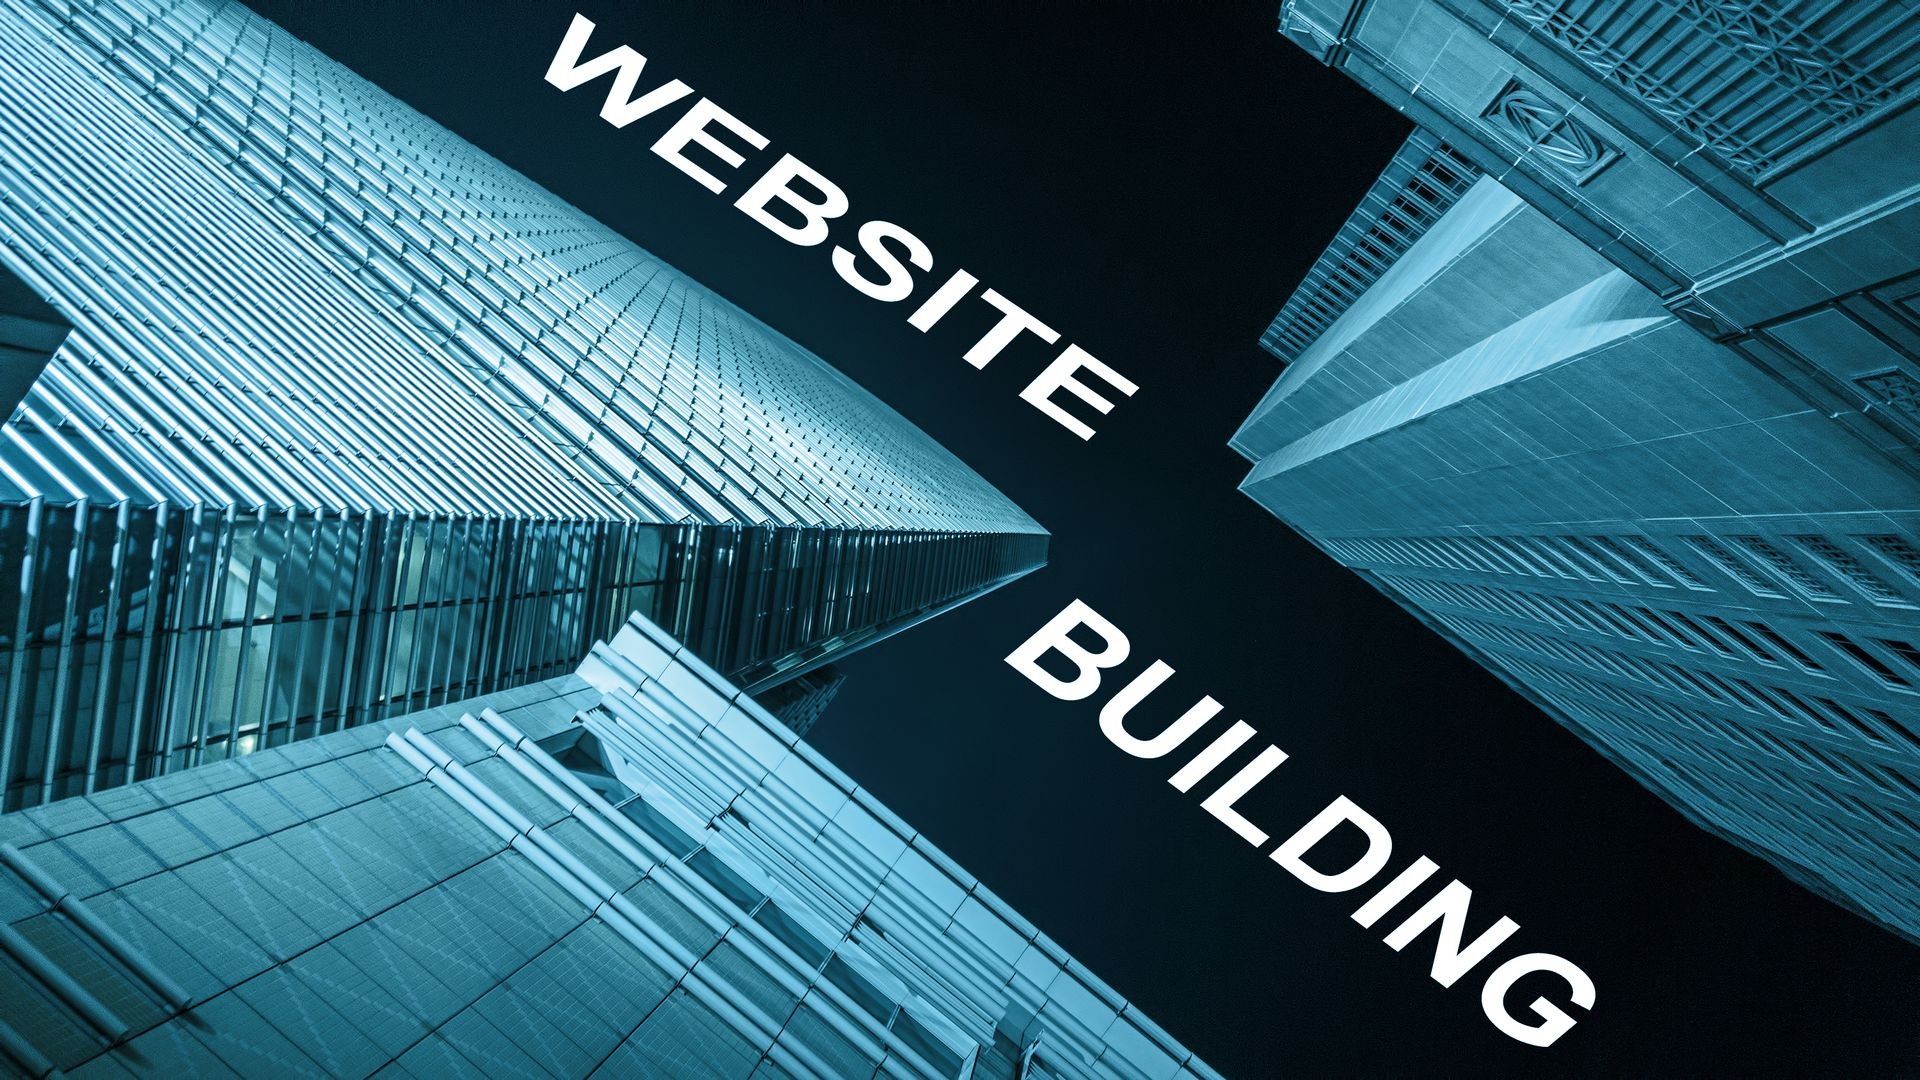 Modern buildings from low angle at night with text website building.